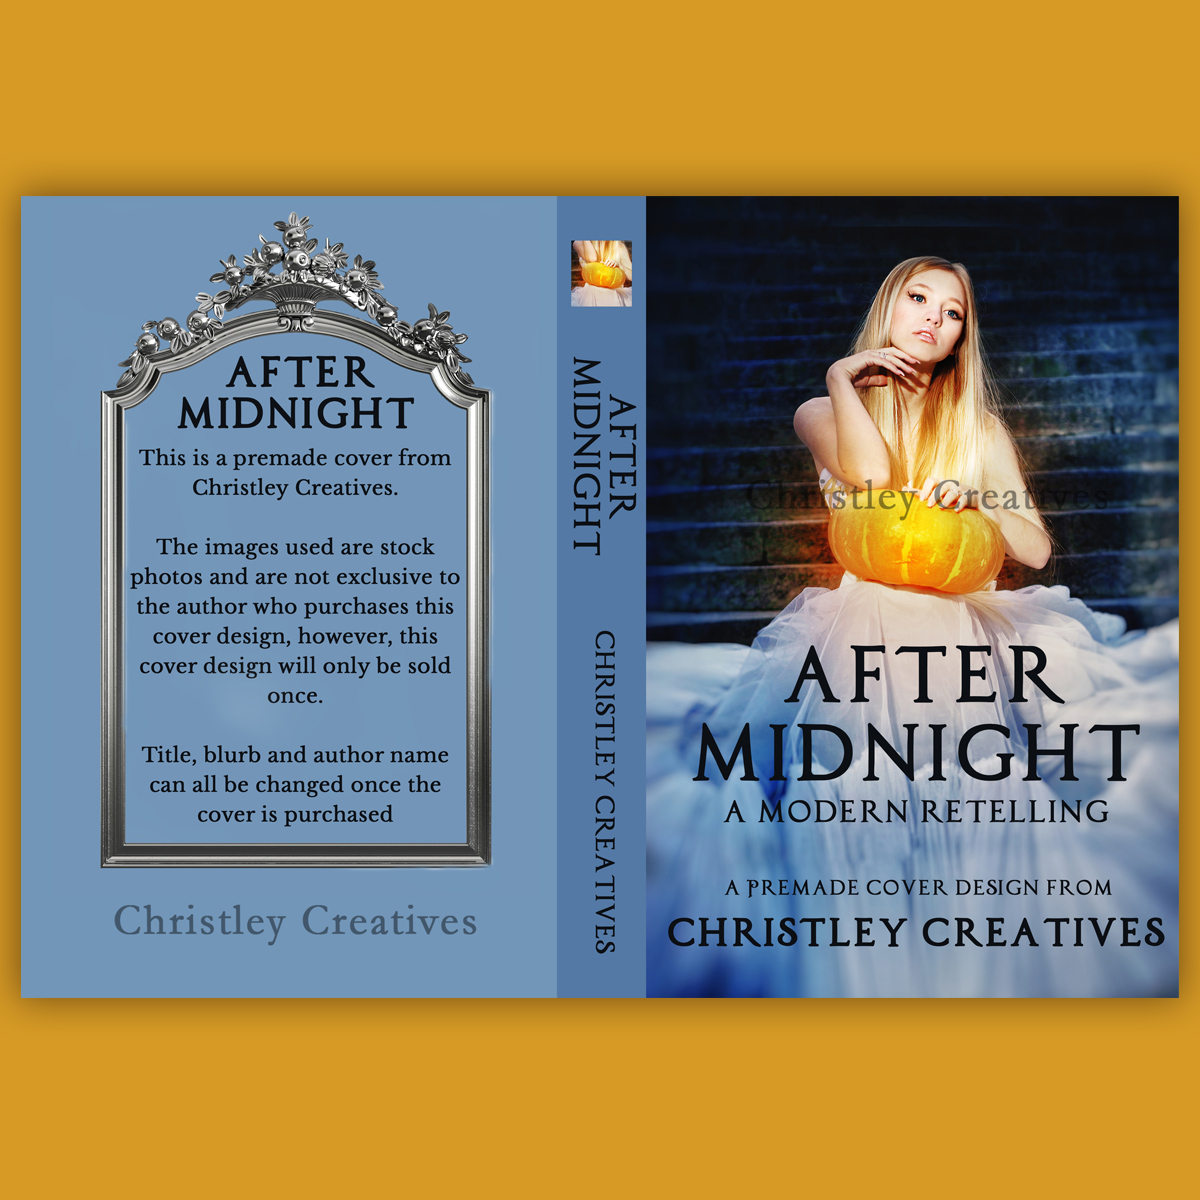 After Midnight - Premade Contemporary Romance Book Cover from Christley Creatives